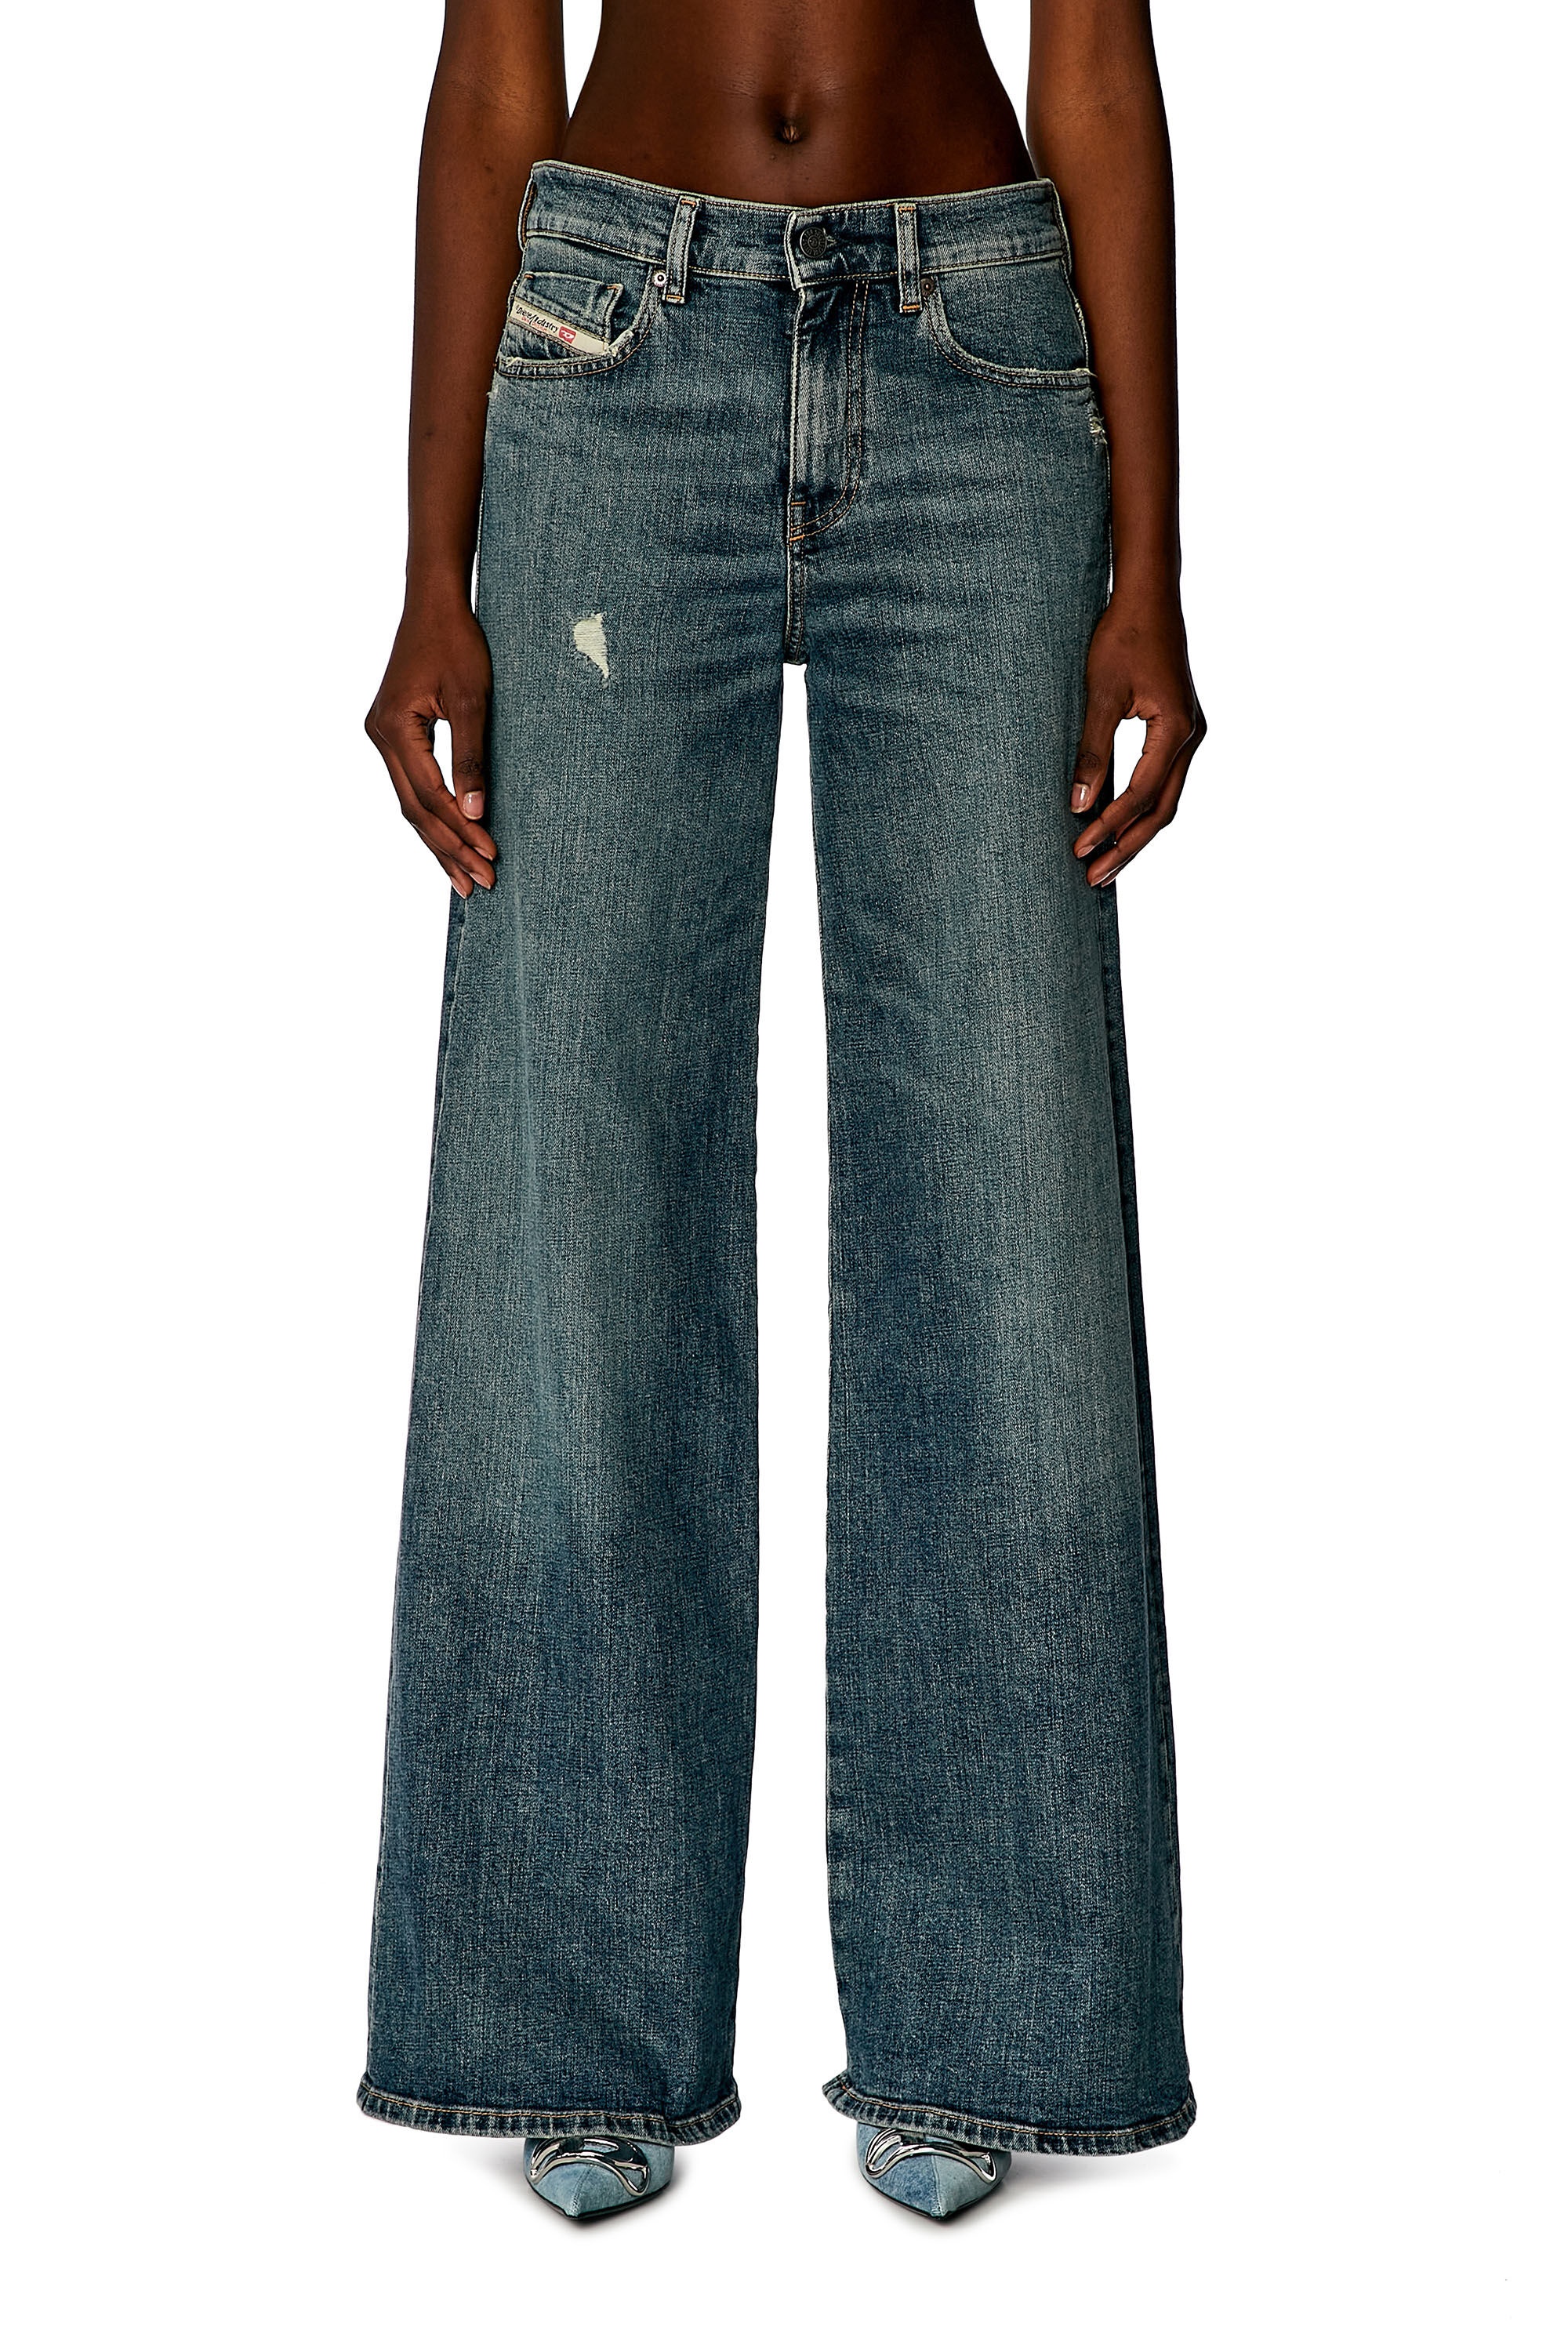 BOOTCUT AND FLARE JEANS 1978 D-AKEMI 0DQAC - 3